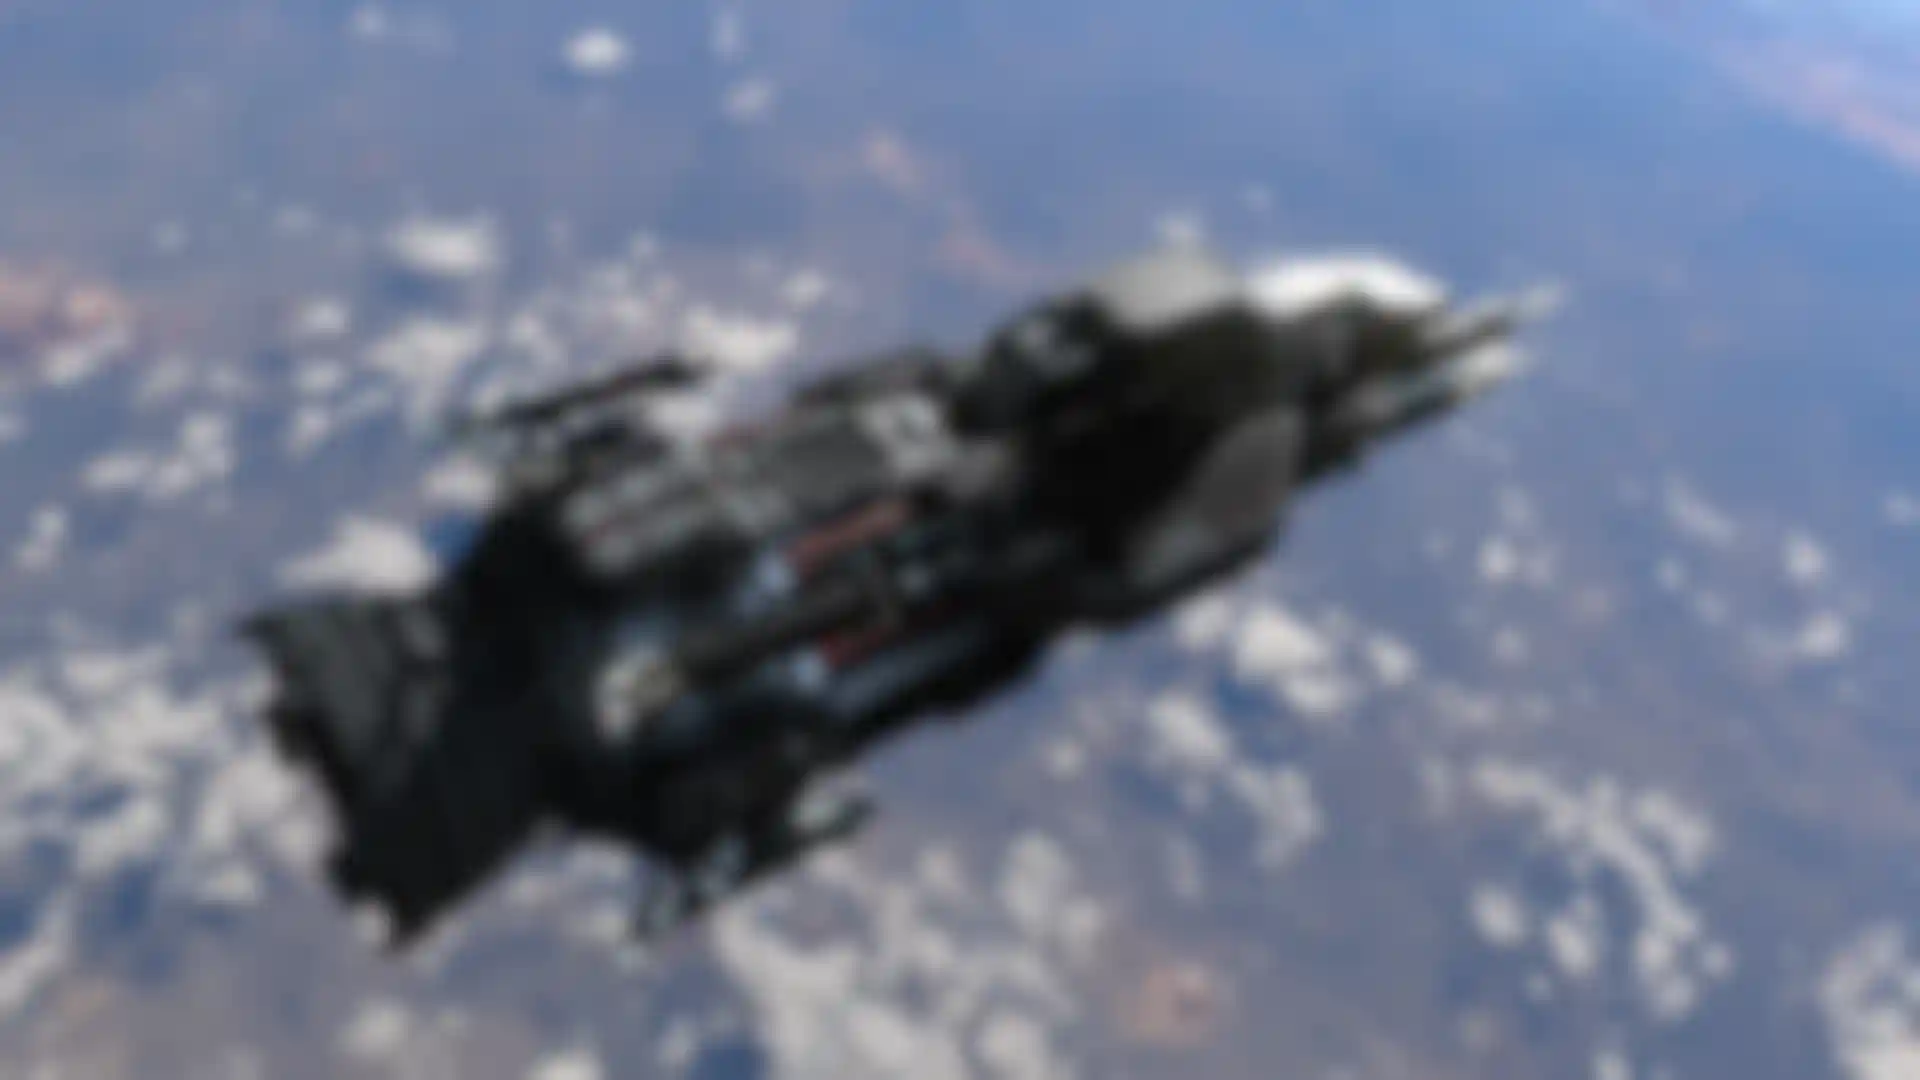 Using Redshift for The Expanse image